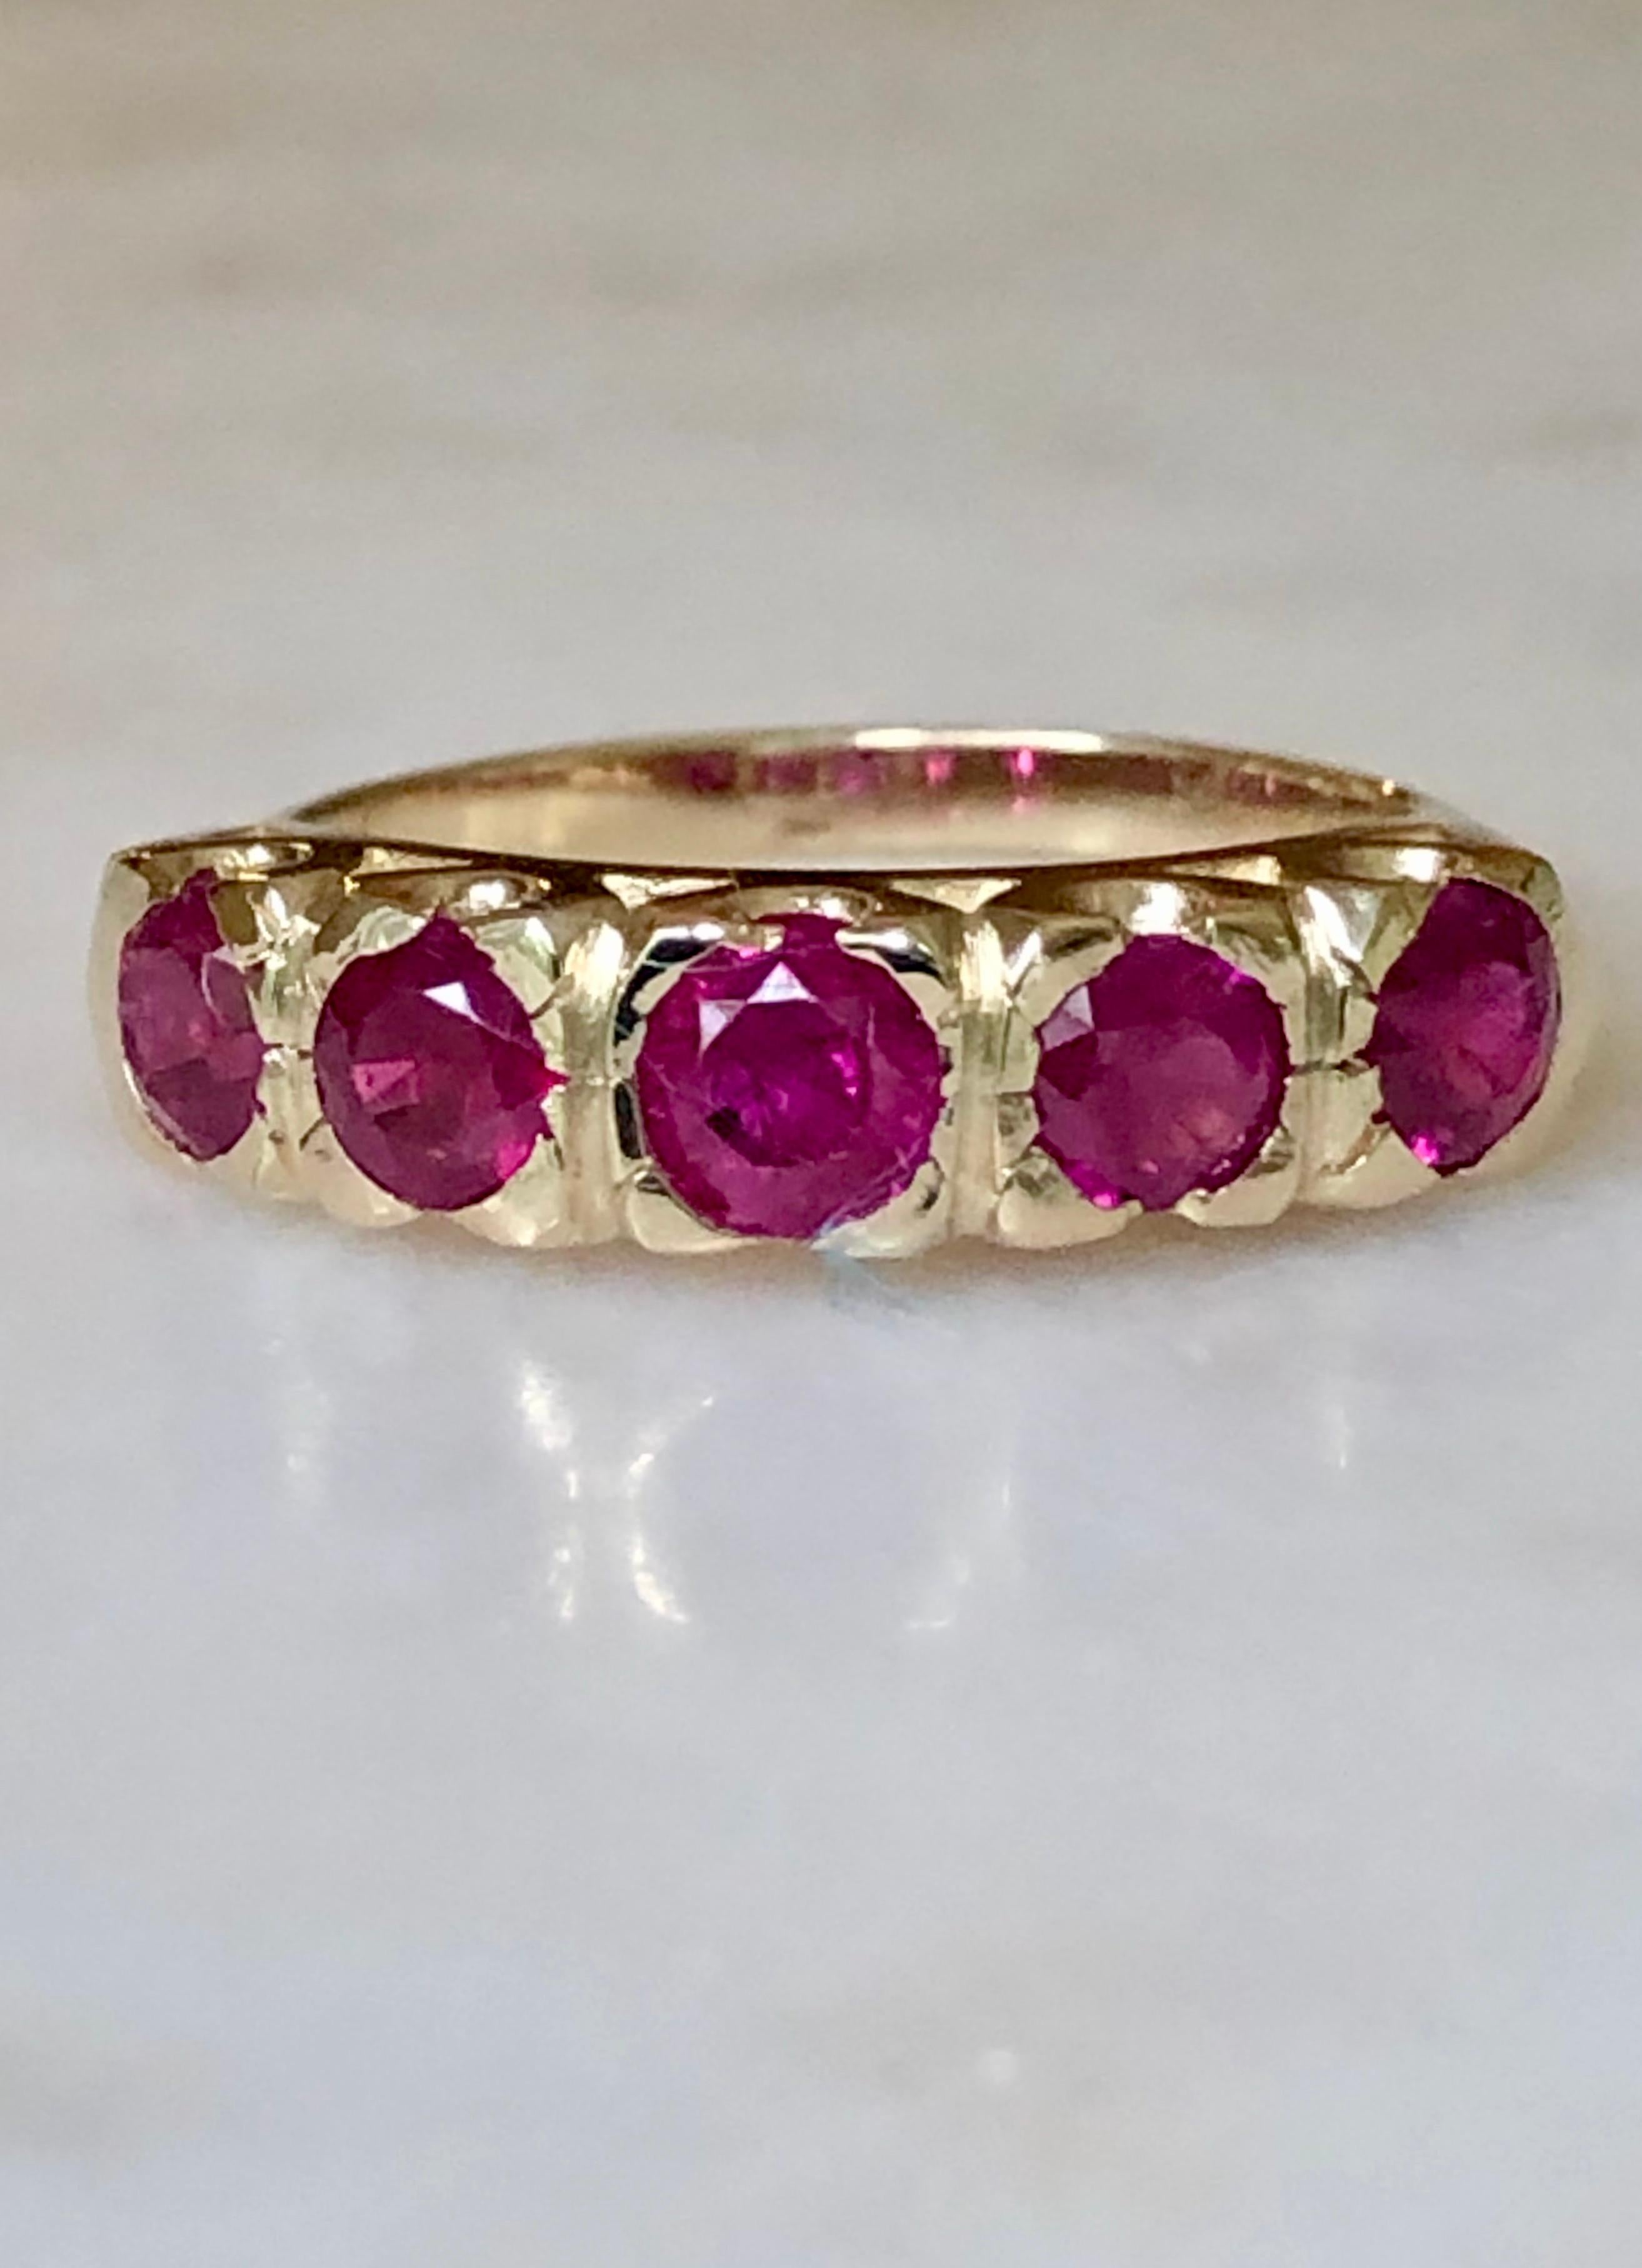 Beautiful yellow gold 1.90 Carats Natural Burmese Ruby Fishtail Mounting Anniversary Antique Style Ring - Size 6 3/4.  This yellow gold 14K  anniversary band is stunning!   The ring has a fishtail style mounting that holds (5) round cut Burma rubies